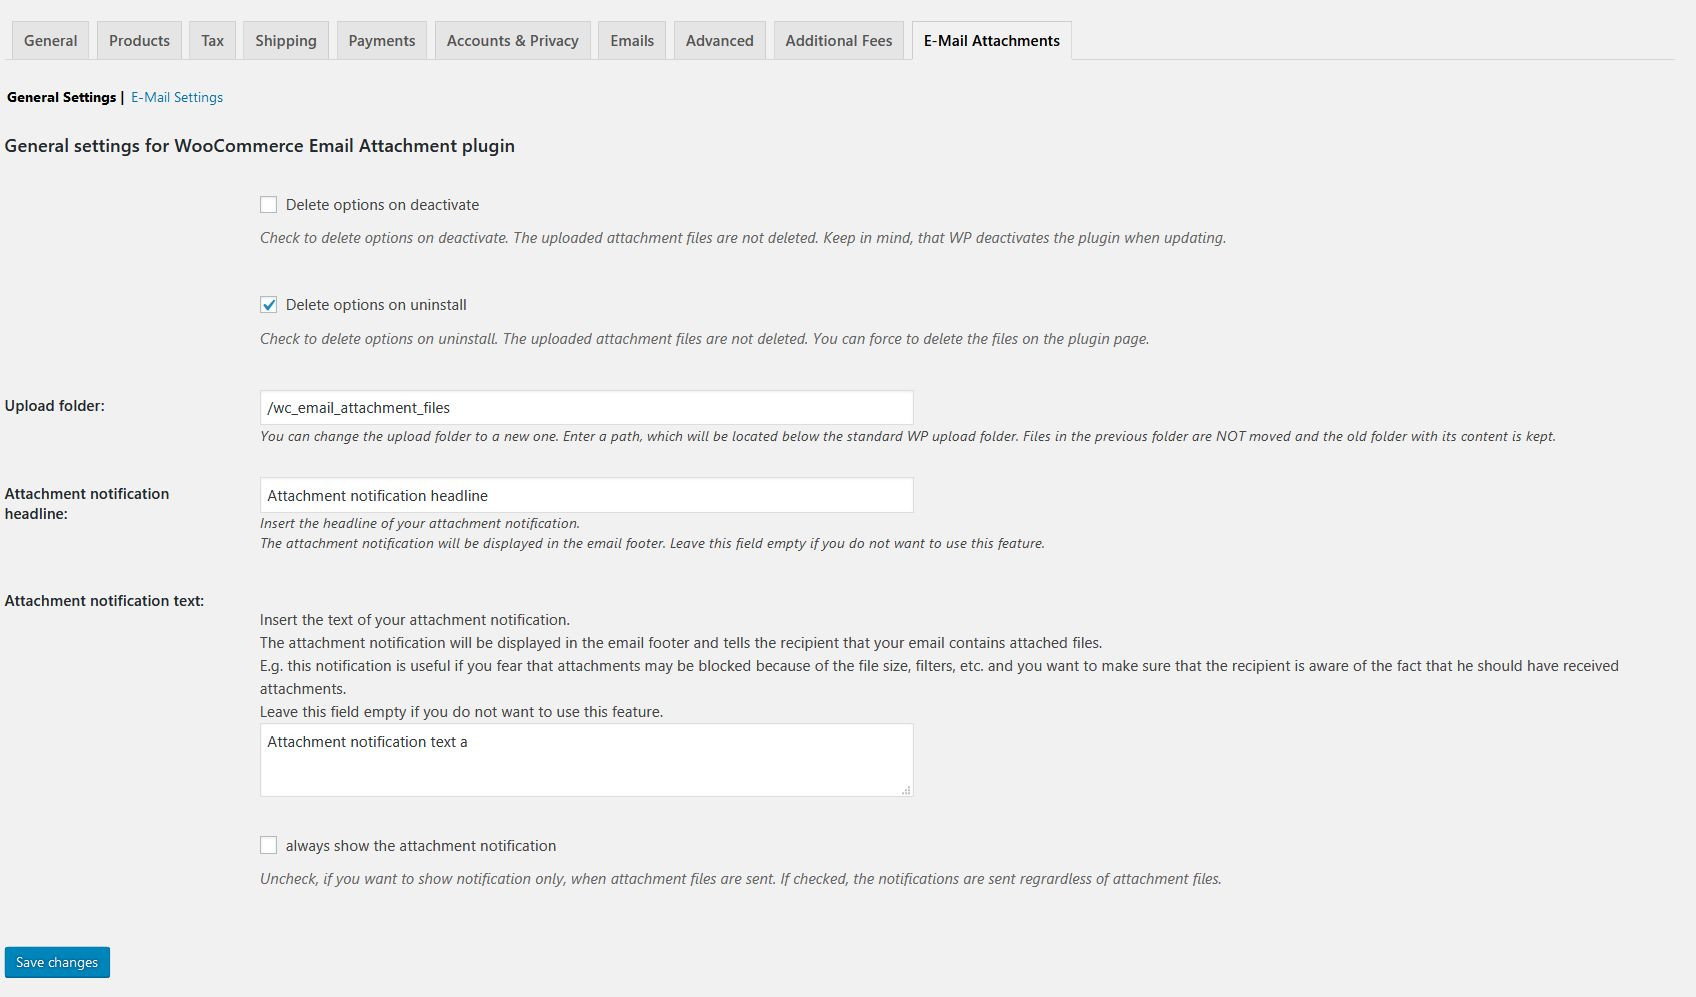 Screenshot of the e-mail attachments admin/settings page (general settings)